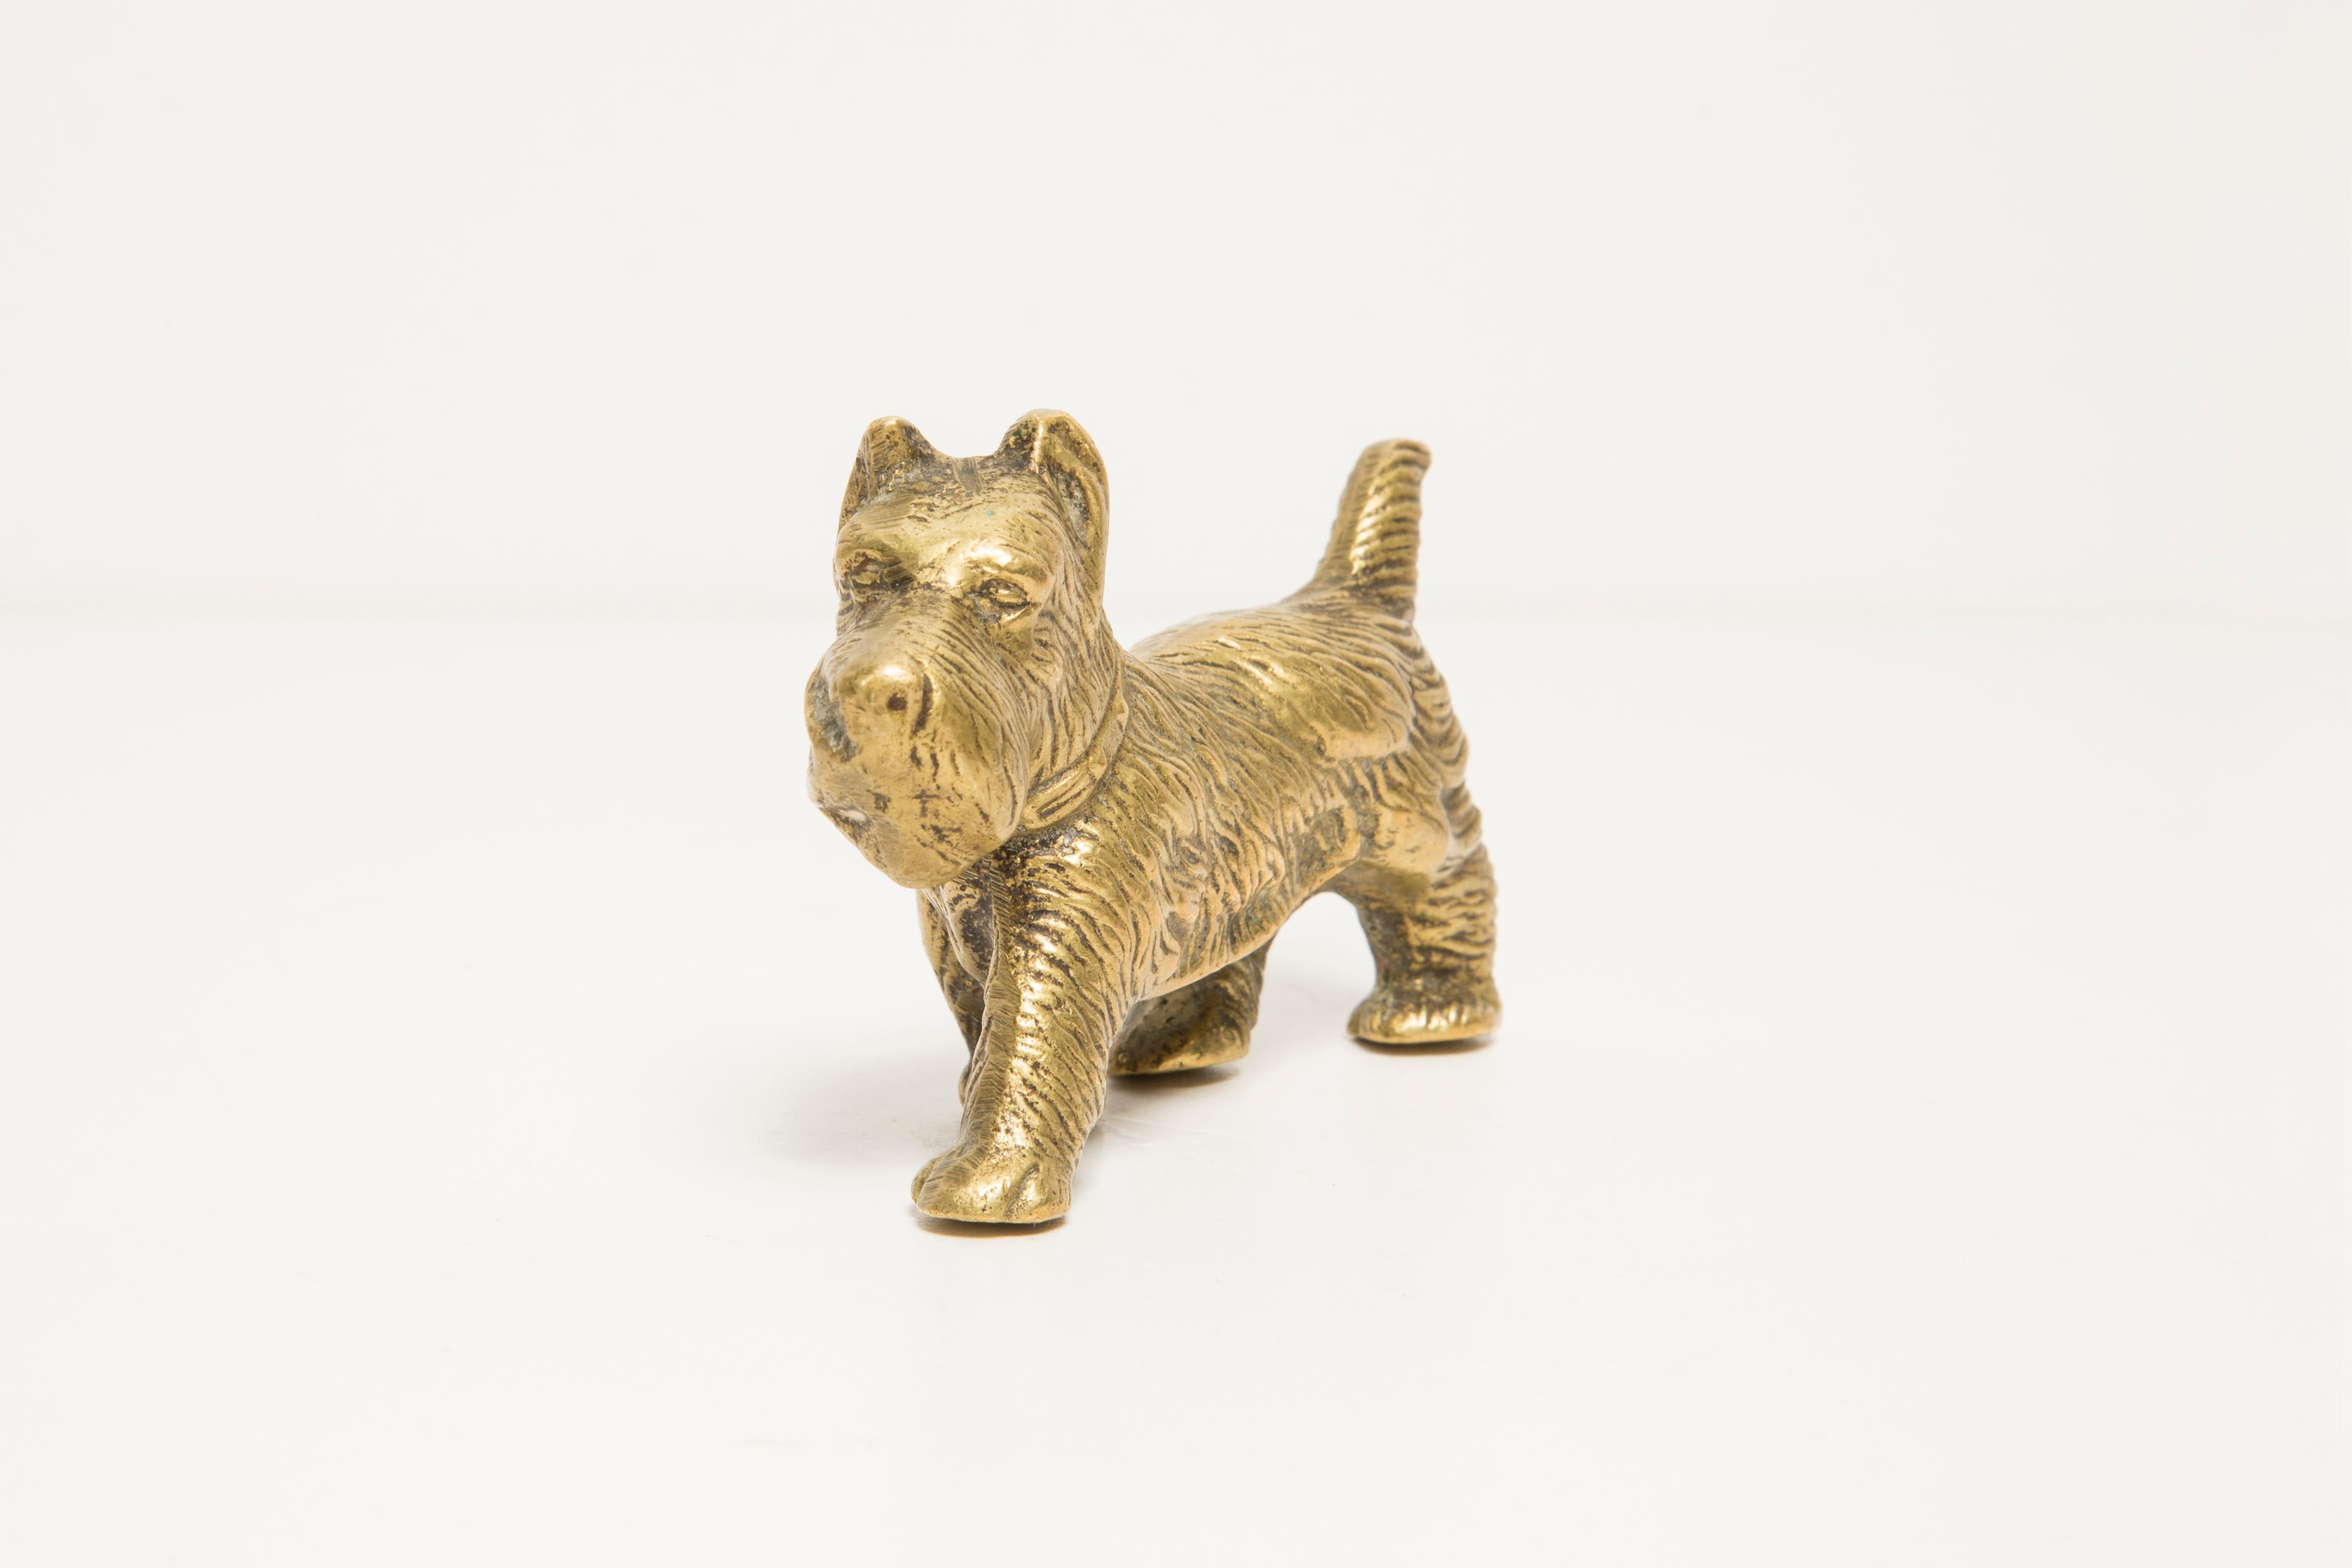 Mid-Century Modern Midcentury West Terrier Dog Gold Metal Decorative Sculpture, Italy, 1950s For Sale